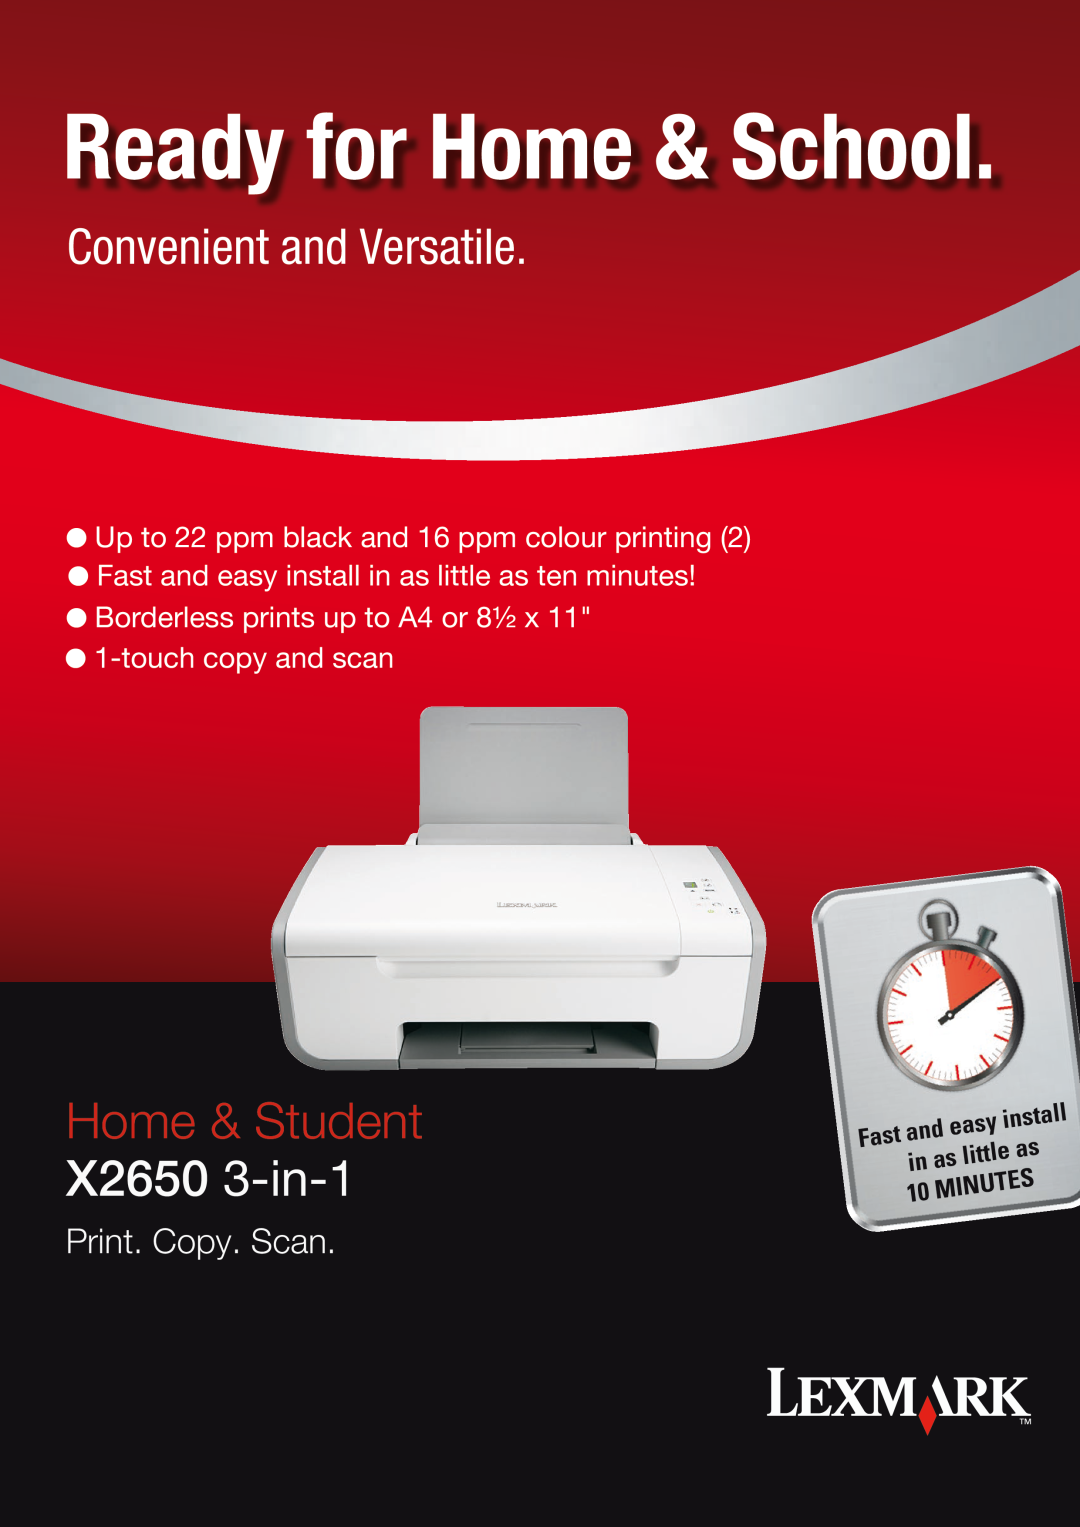 Lexmark X 2650 manual Ready for Home & School, Home & Student, X2650 3-in-1, Convenient and Versatile, Print. Copy. Scan 